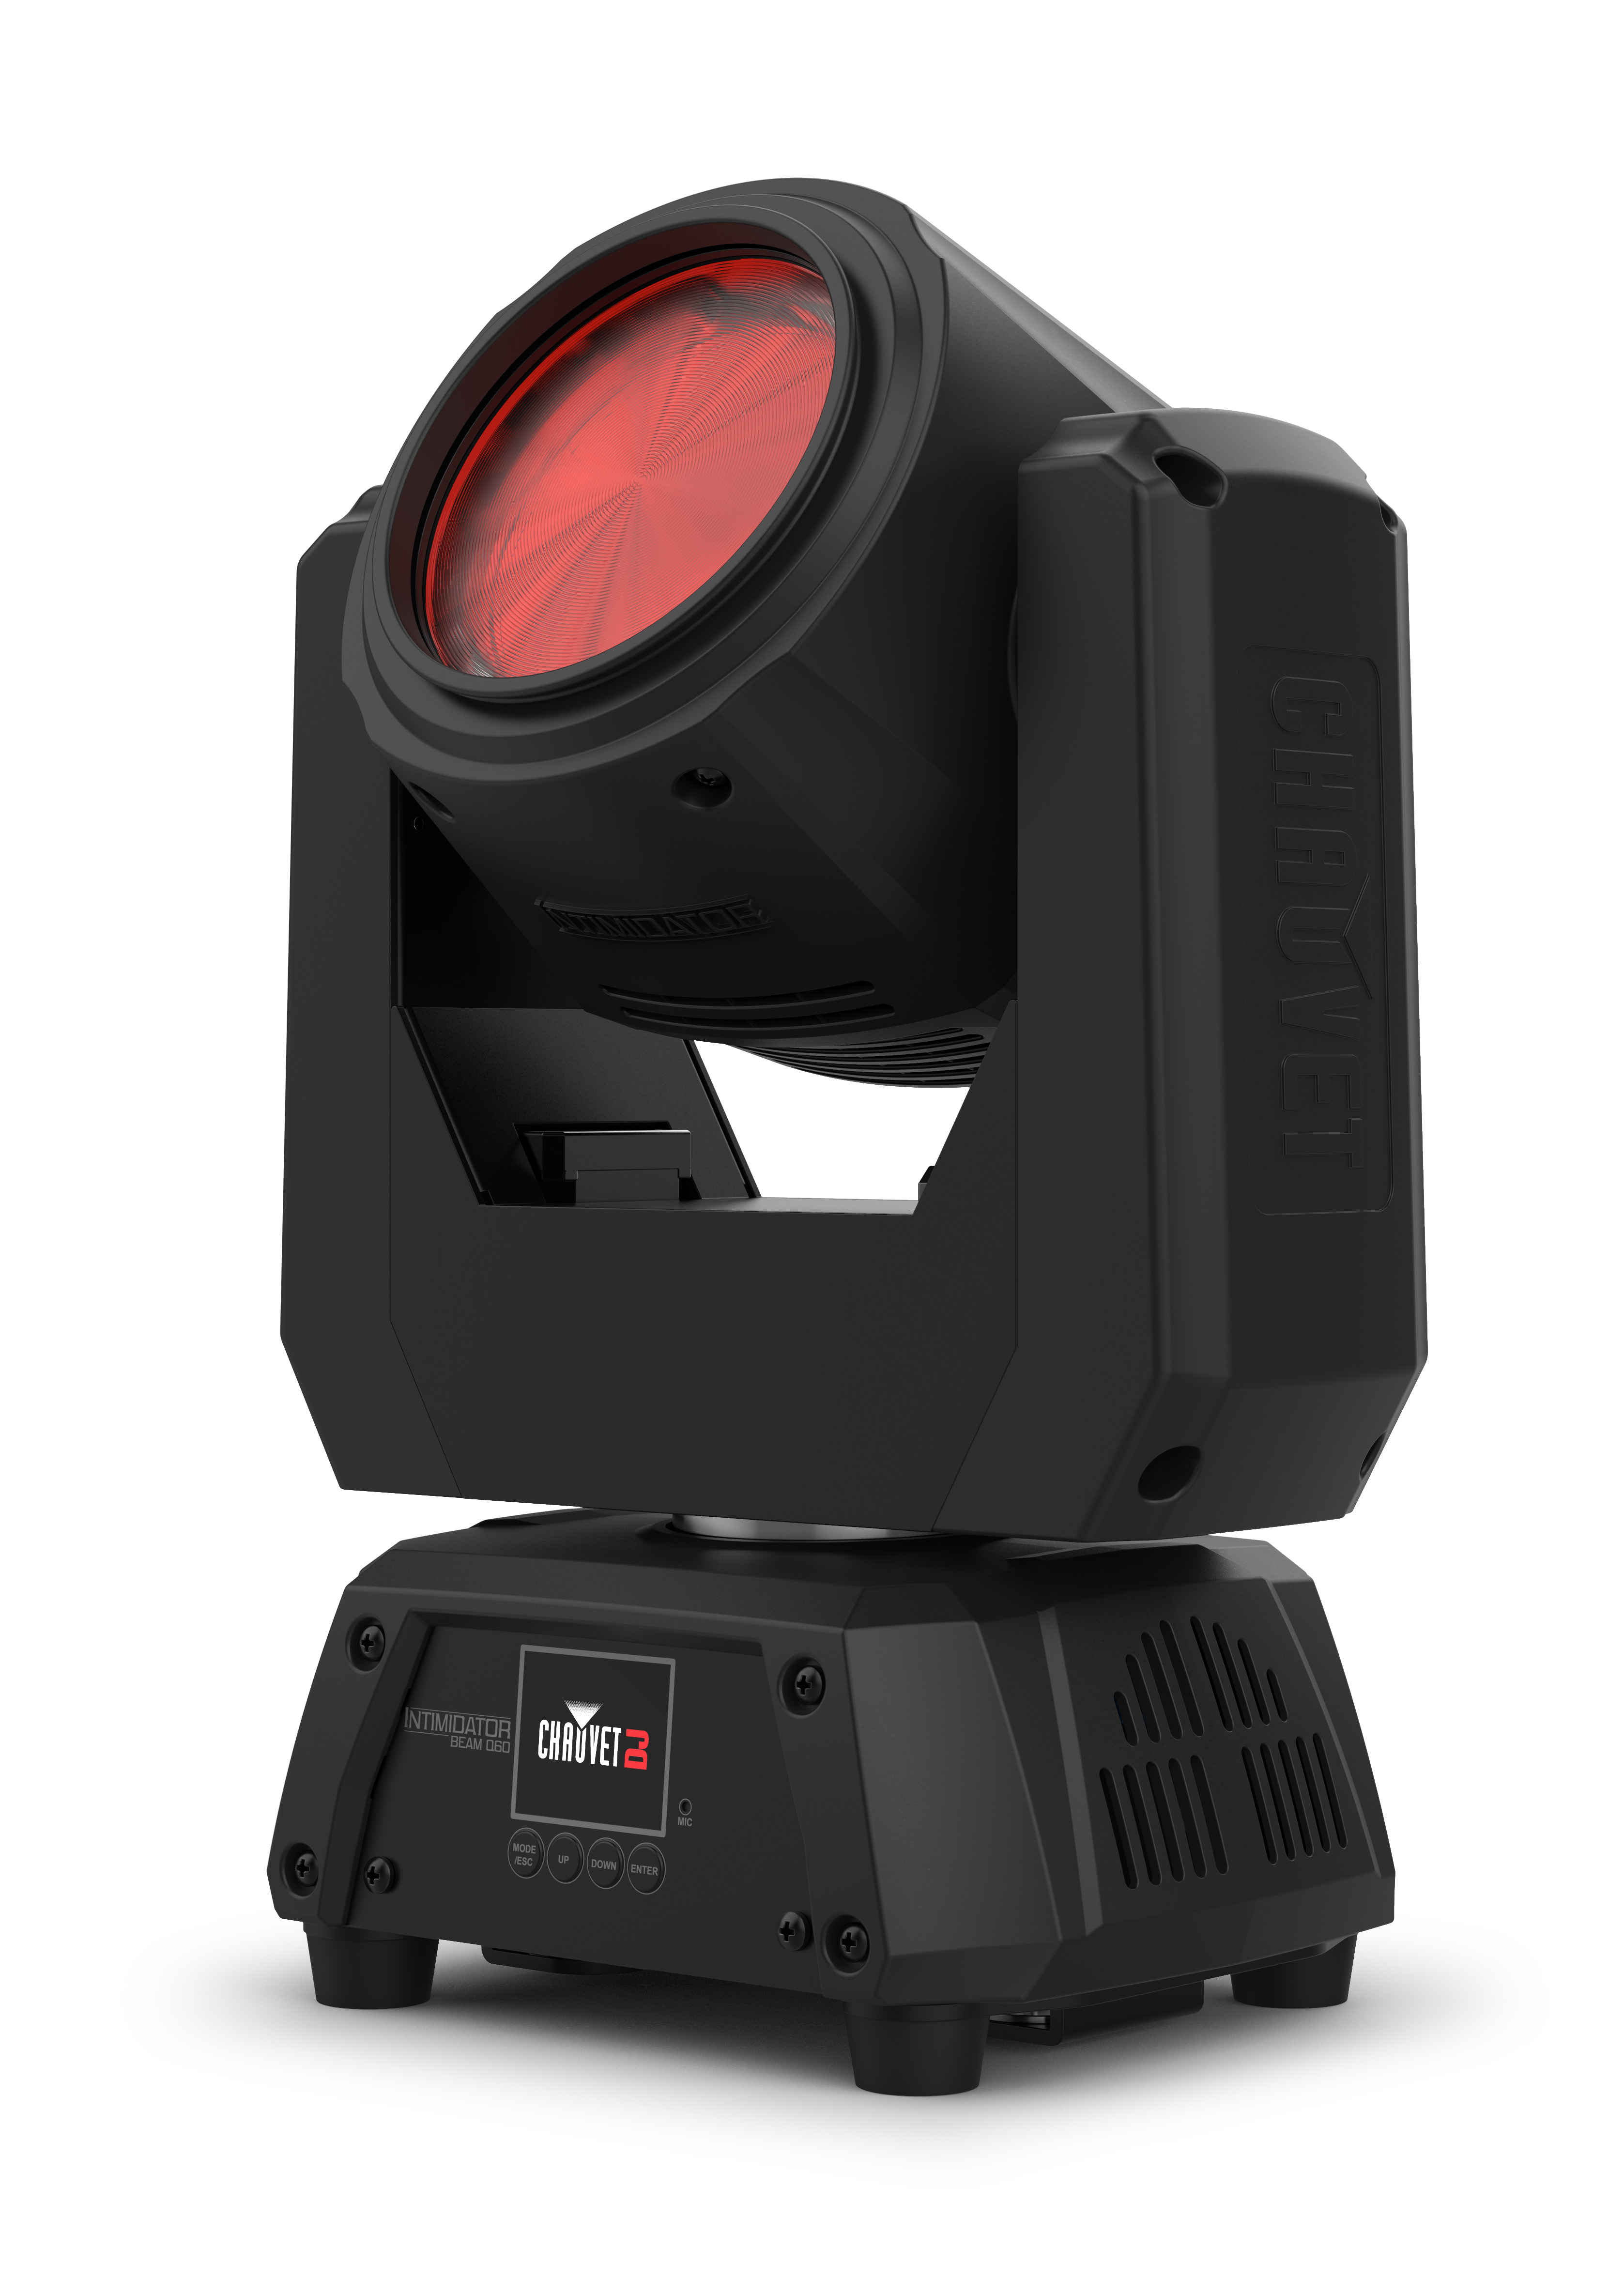 CHAUVET DJ Expands Line With New Power Packed Fixtures